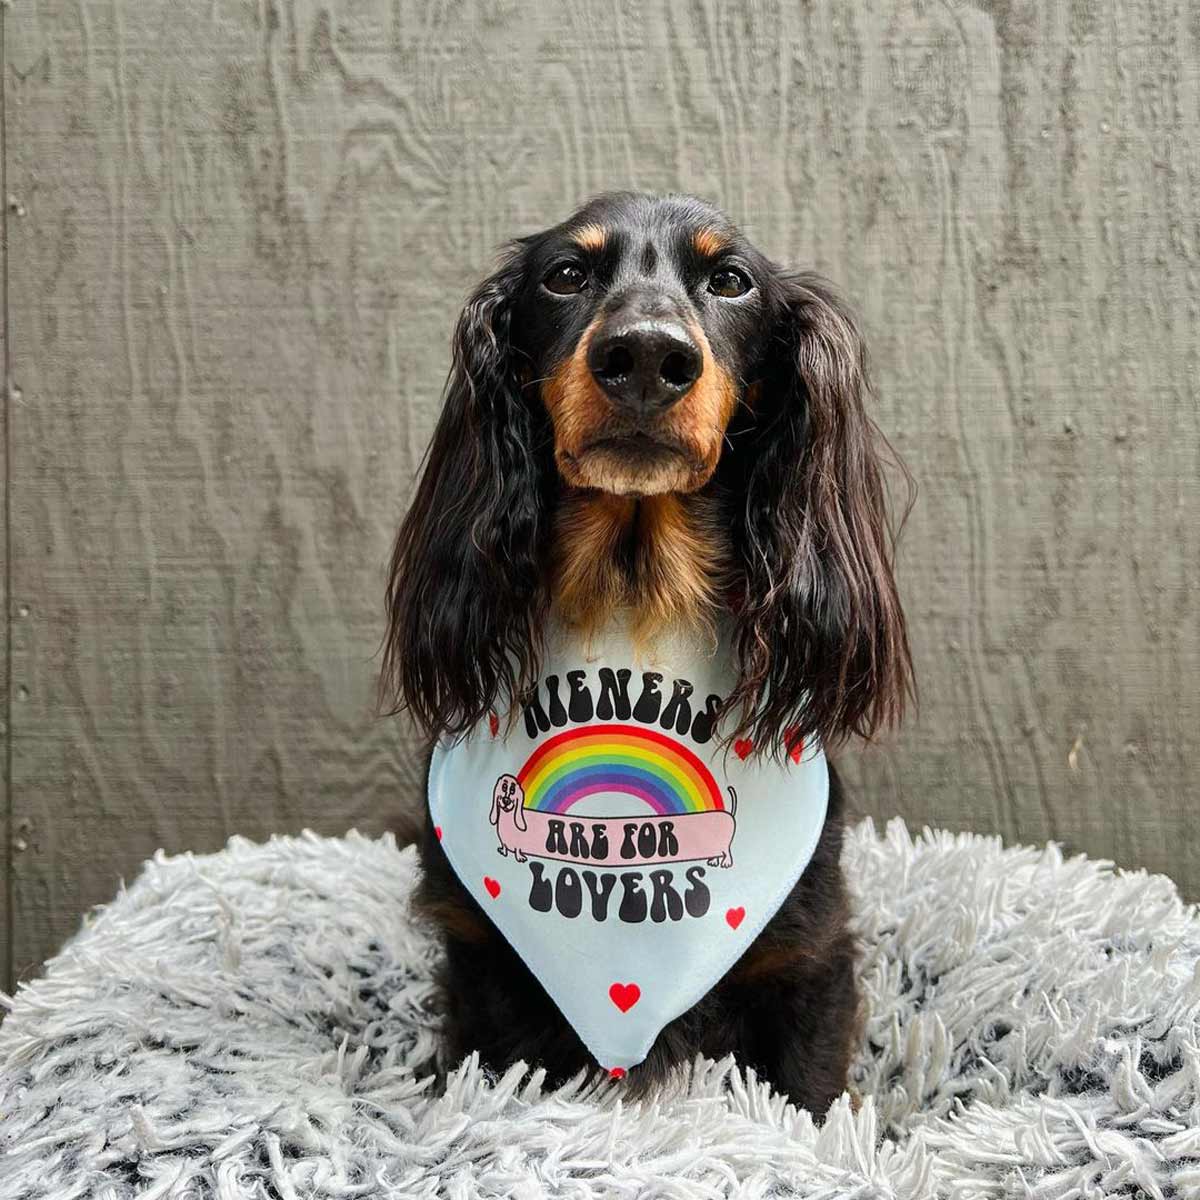 wieners are for lovers dog bandana - bean goods